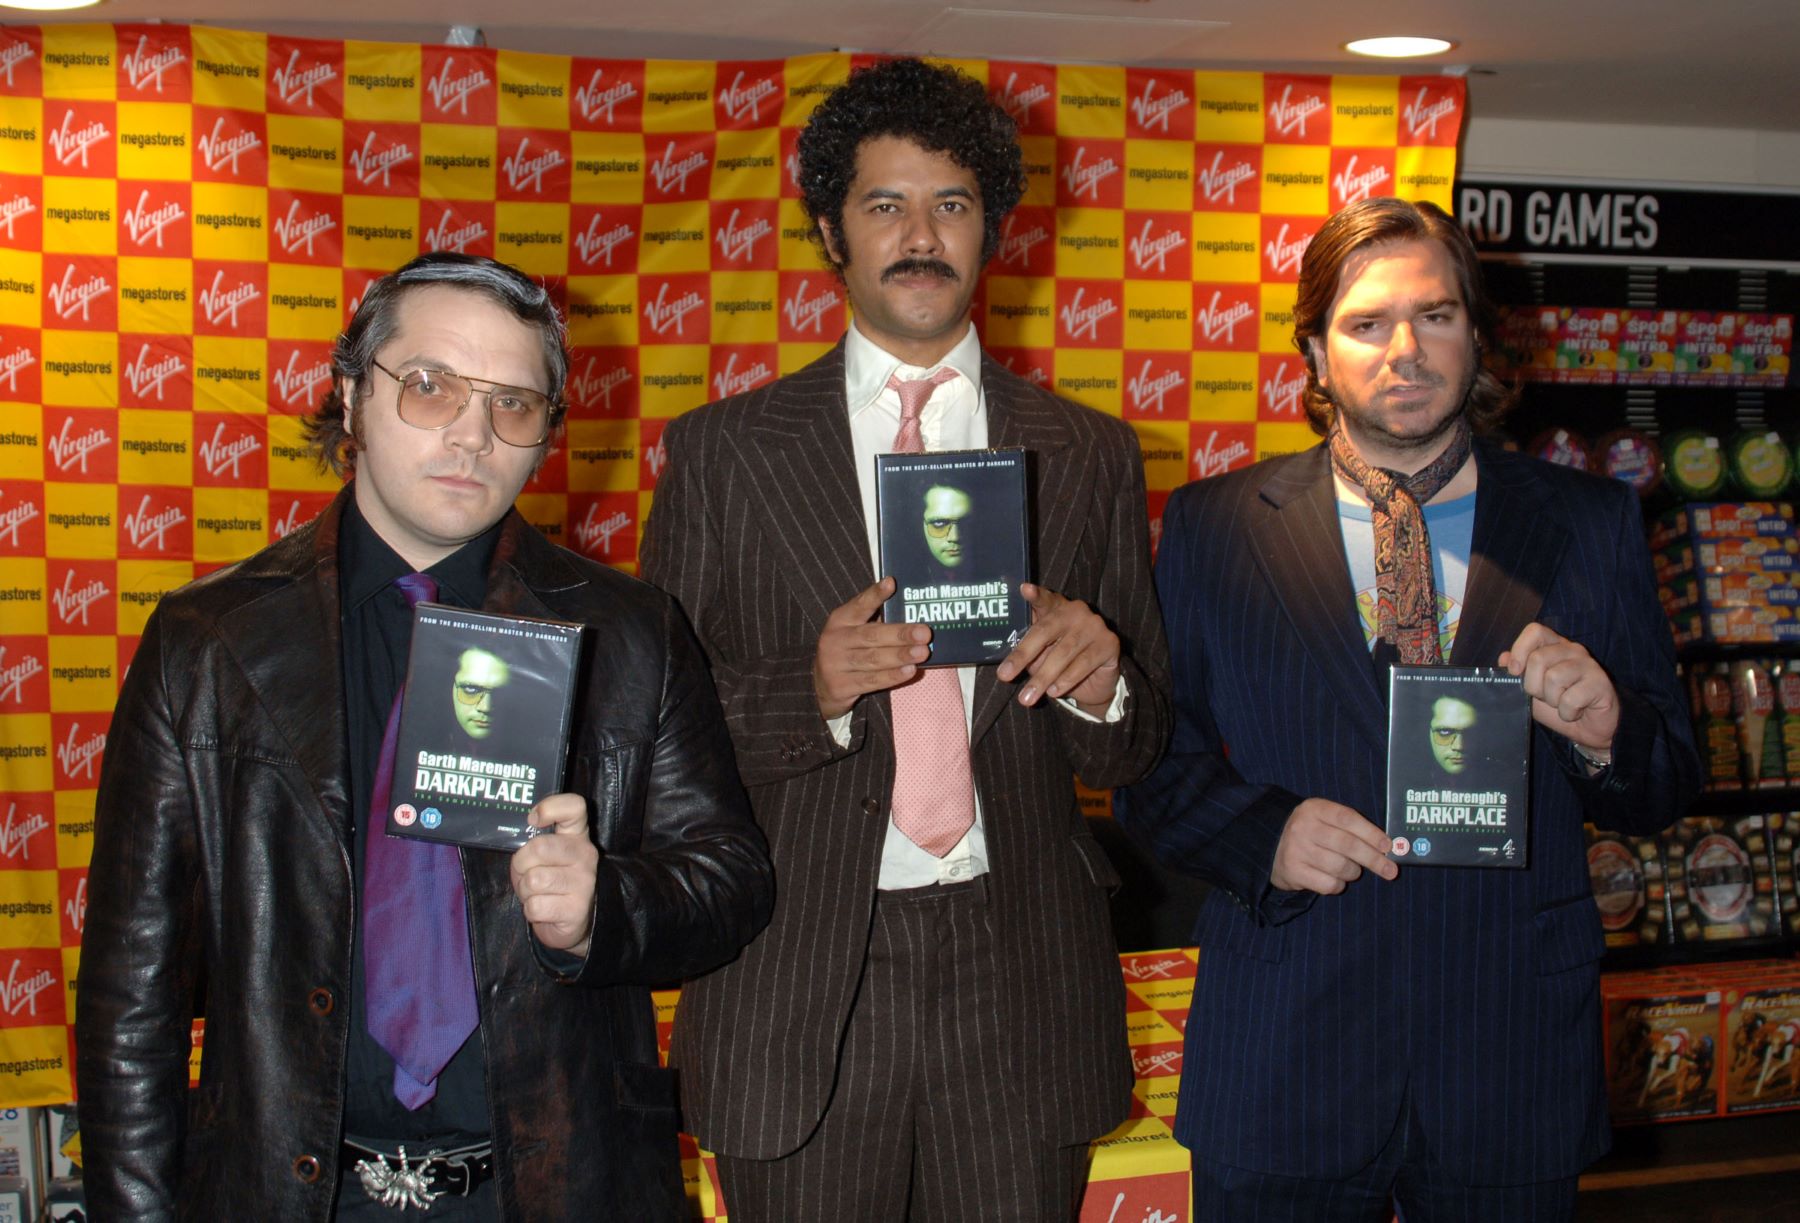 The cast of 'Garth Marenghi's Dark Place' signing DVD copies in London